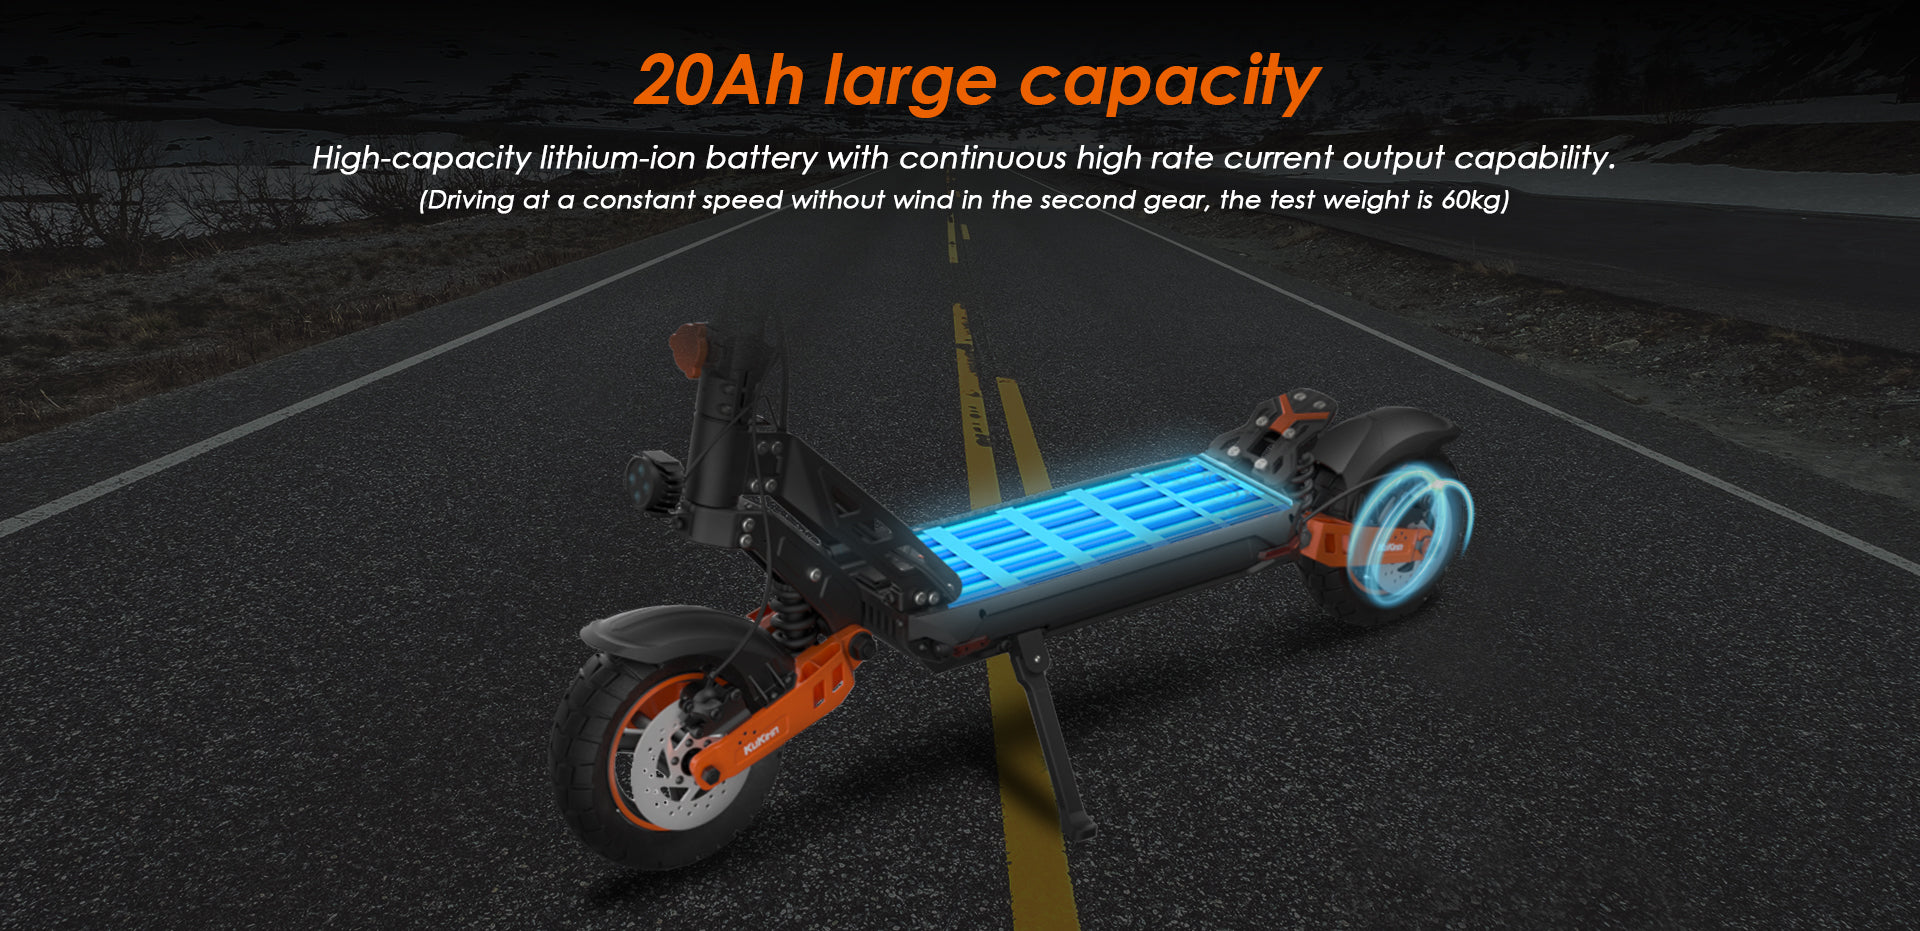 KUKIRIN G2 Max/G2 Master Electric Scooter with Seat, Powerful 1000W Motor,  35 MPH Max Speed, 50 Miles Range, 48V/20Ah Large Capacity Battery, Dual